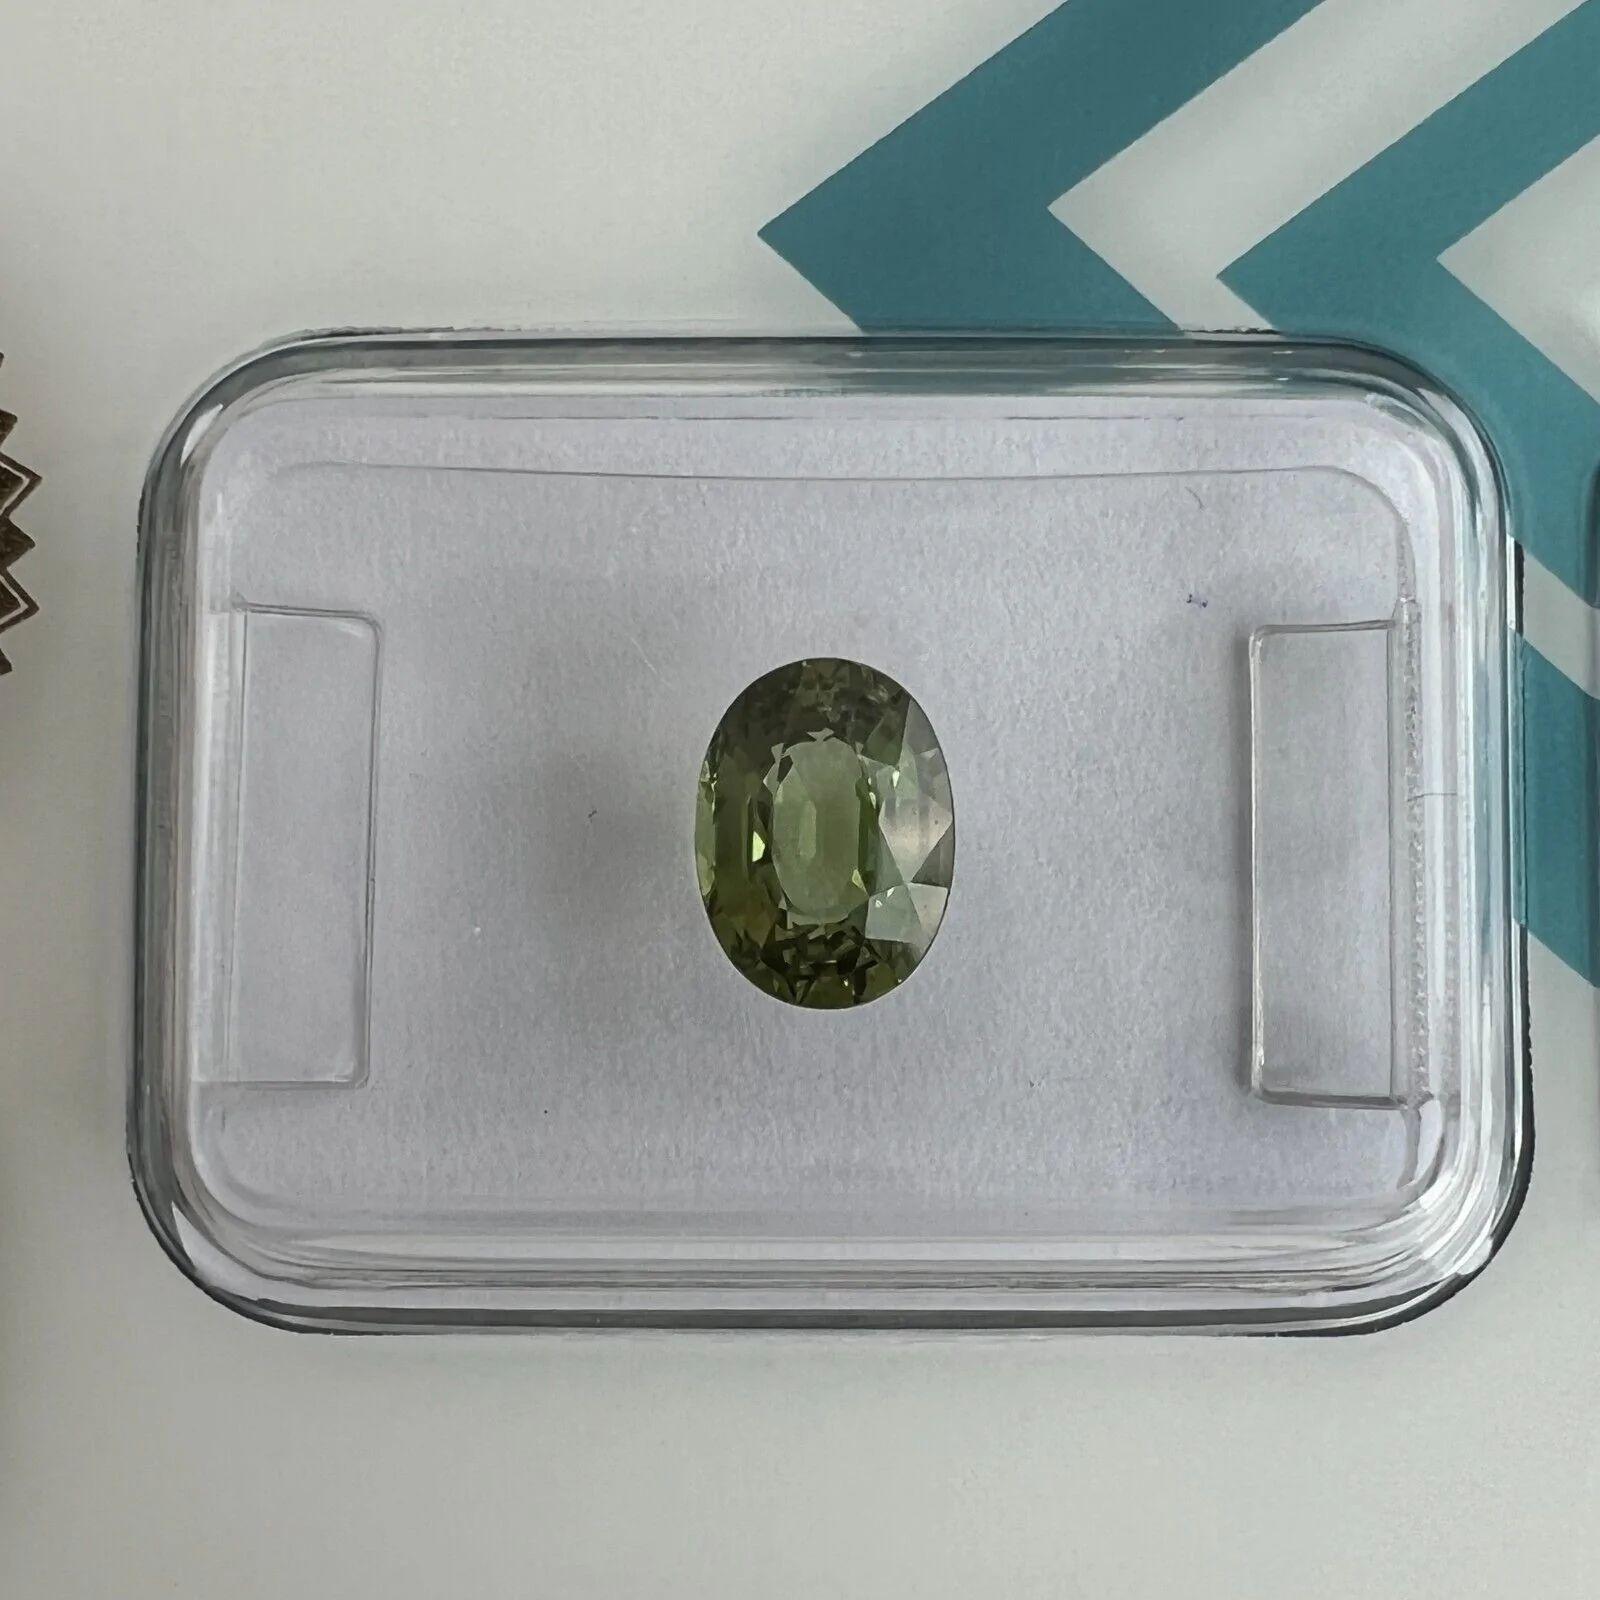 1.04ct Untreated Green Sapphire IGI Certified Unheated Oval Cut Rare Loose Gem

Natural Vivid Green Untreated Sapphire In IGI Blister.
1.04 Carat with an excellent oval cut and totally untreated/unheated which is very rare for natural sapphires.